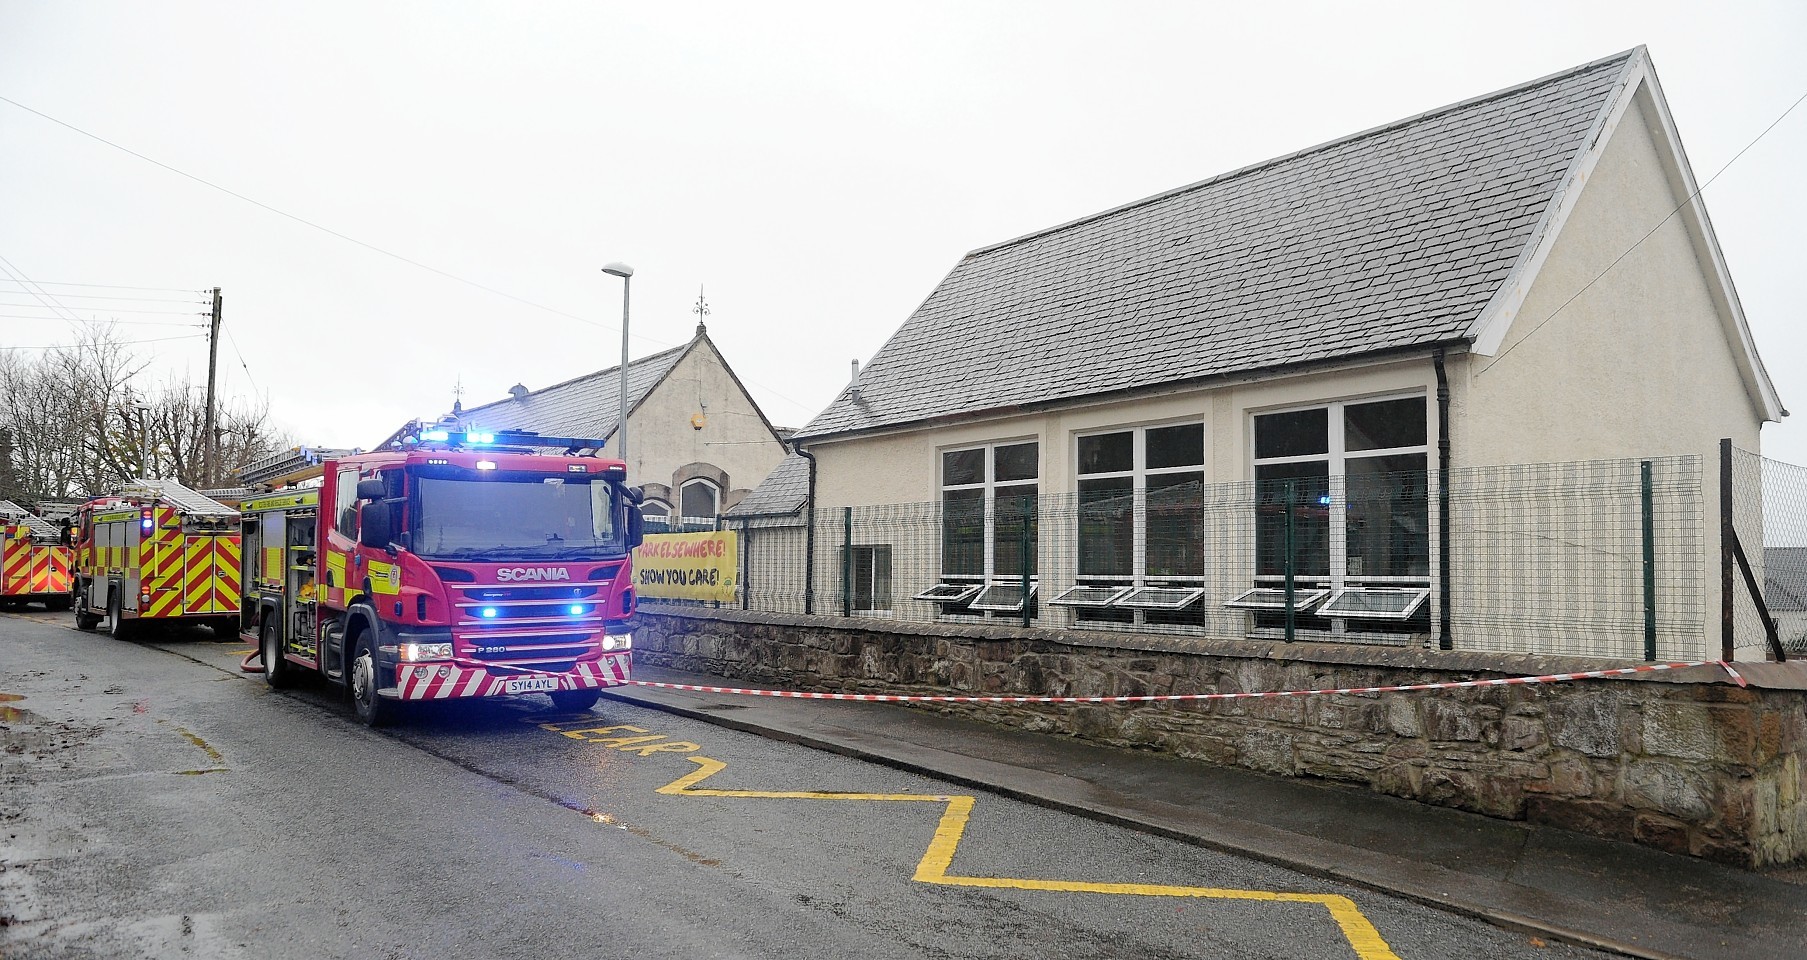 Firefighters at the scene of the classroom fire at Balloch Primary School